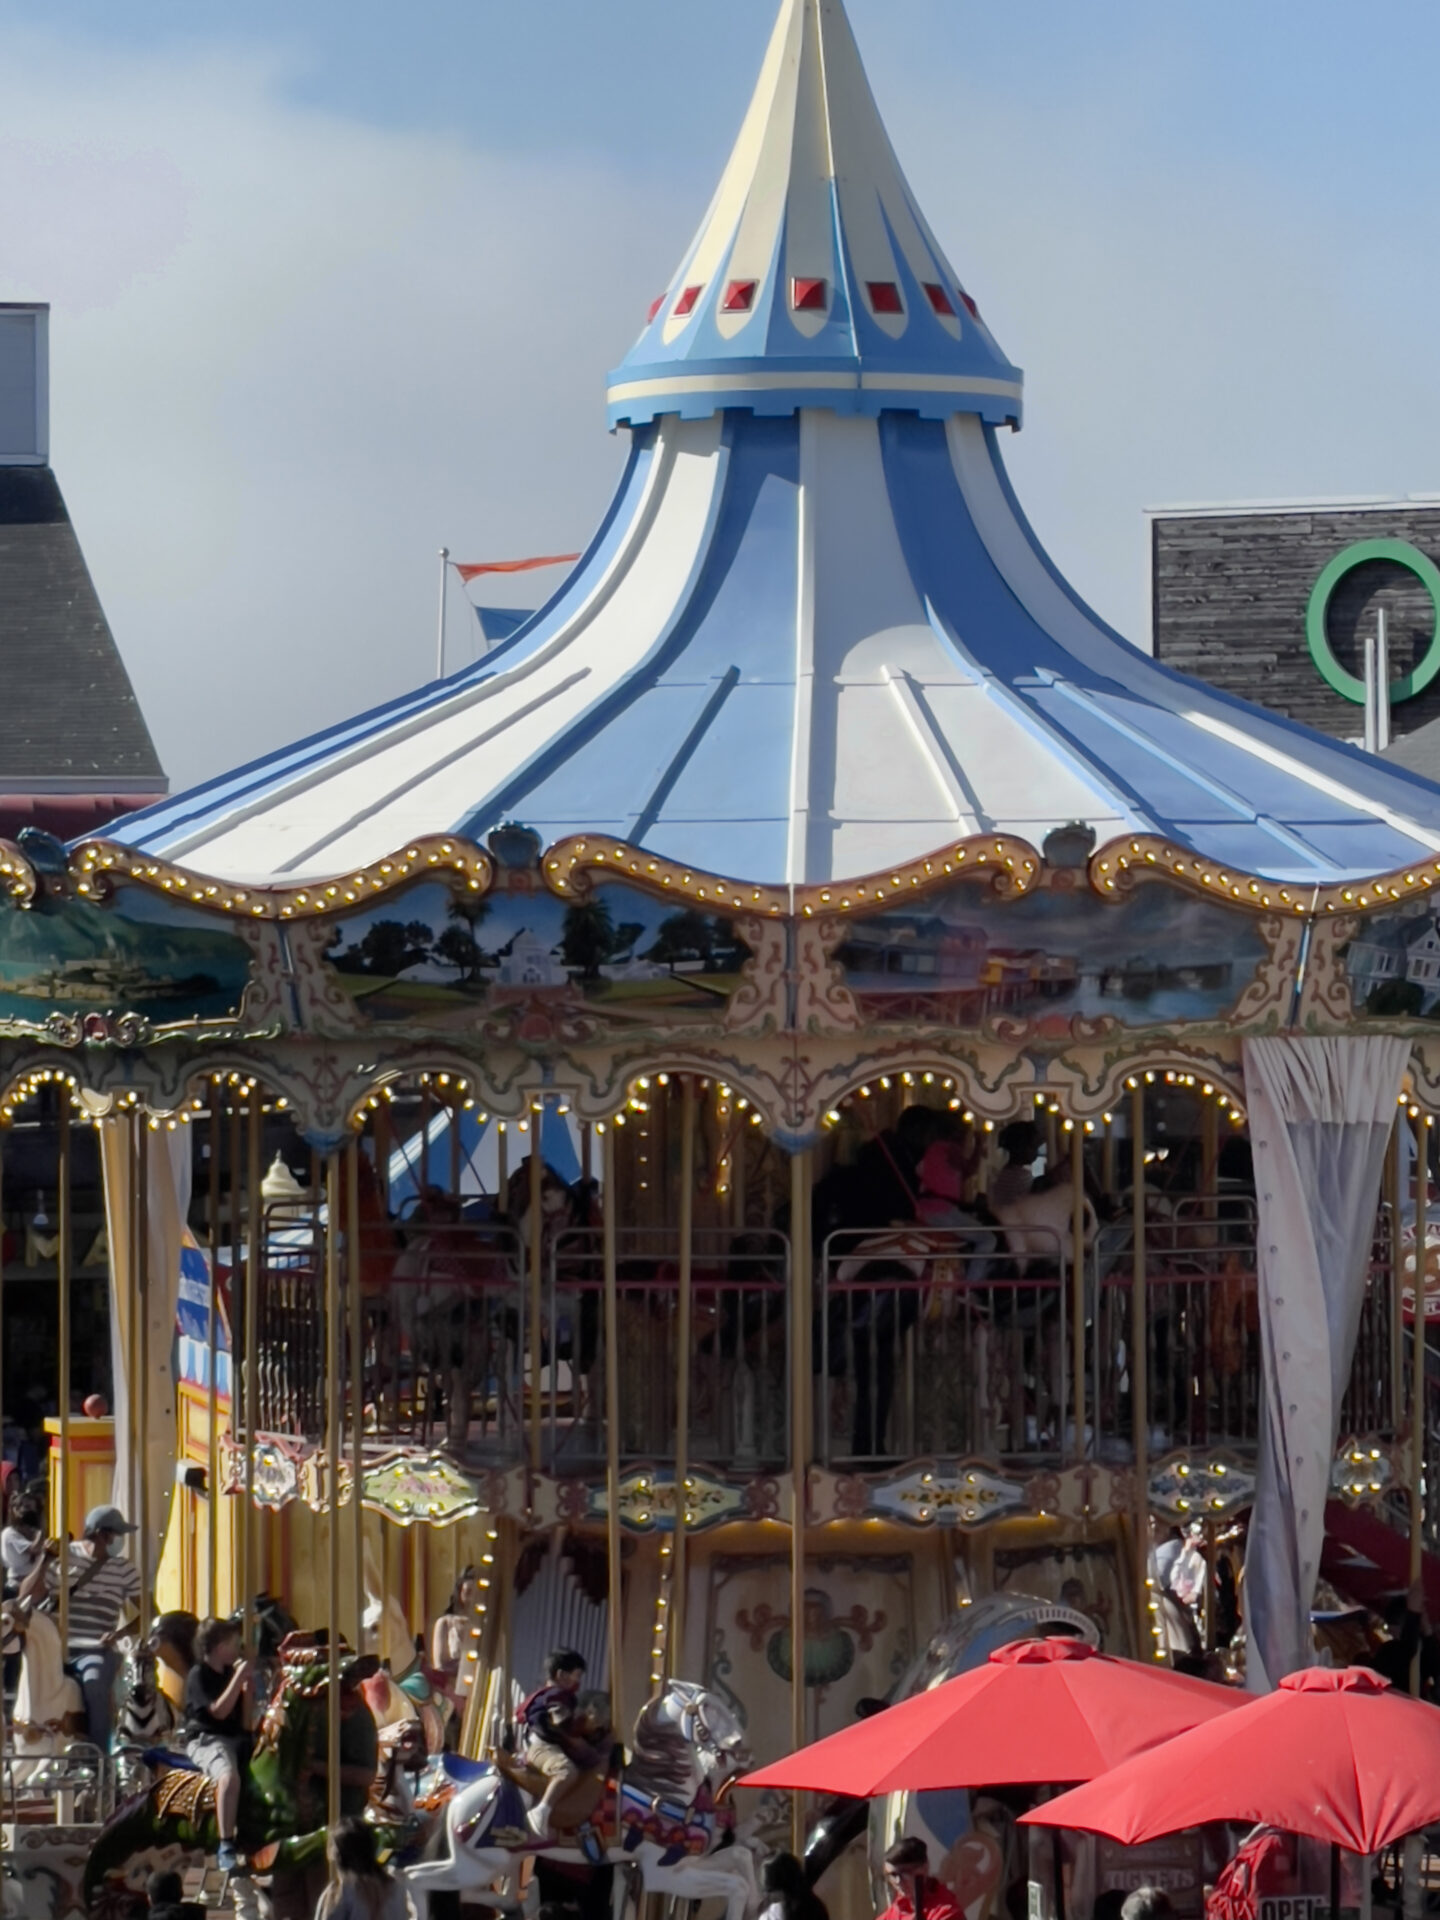 A Blue and White Color Carousel at Pier 39